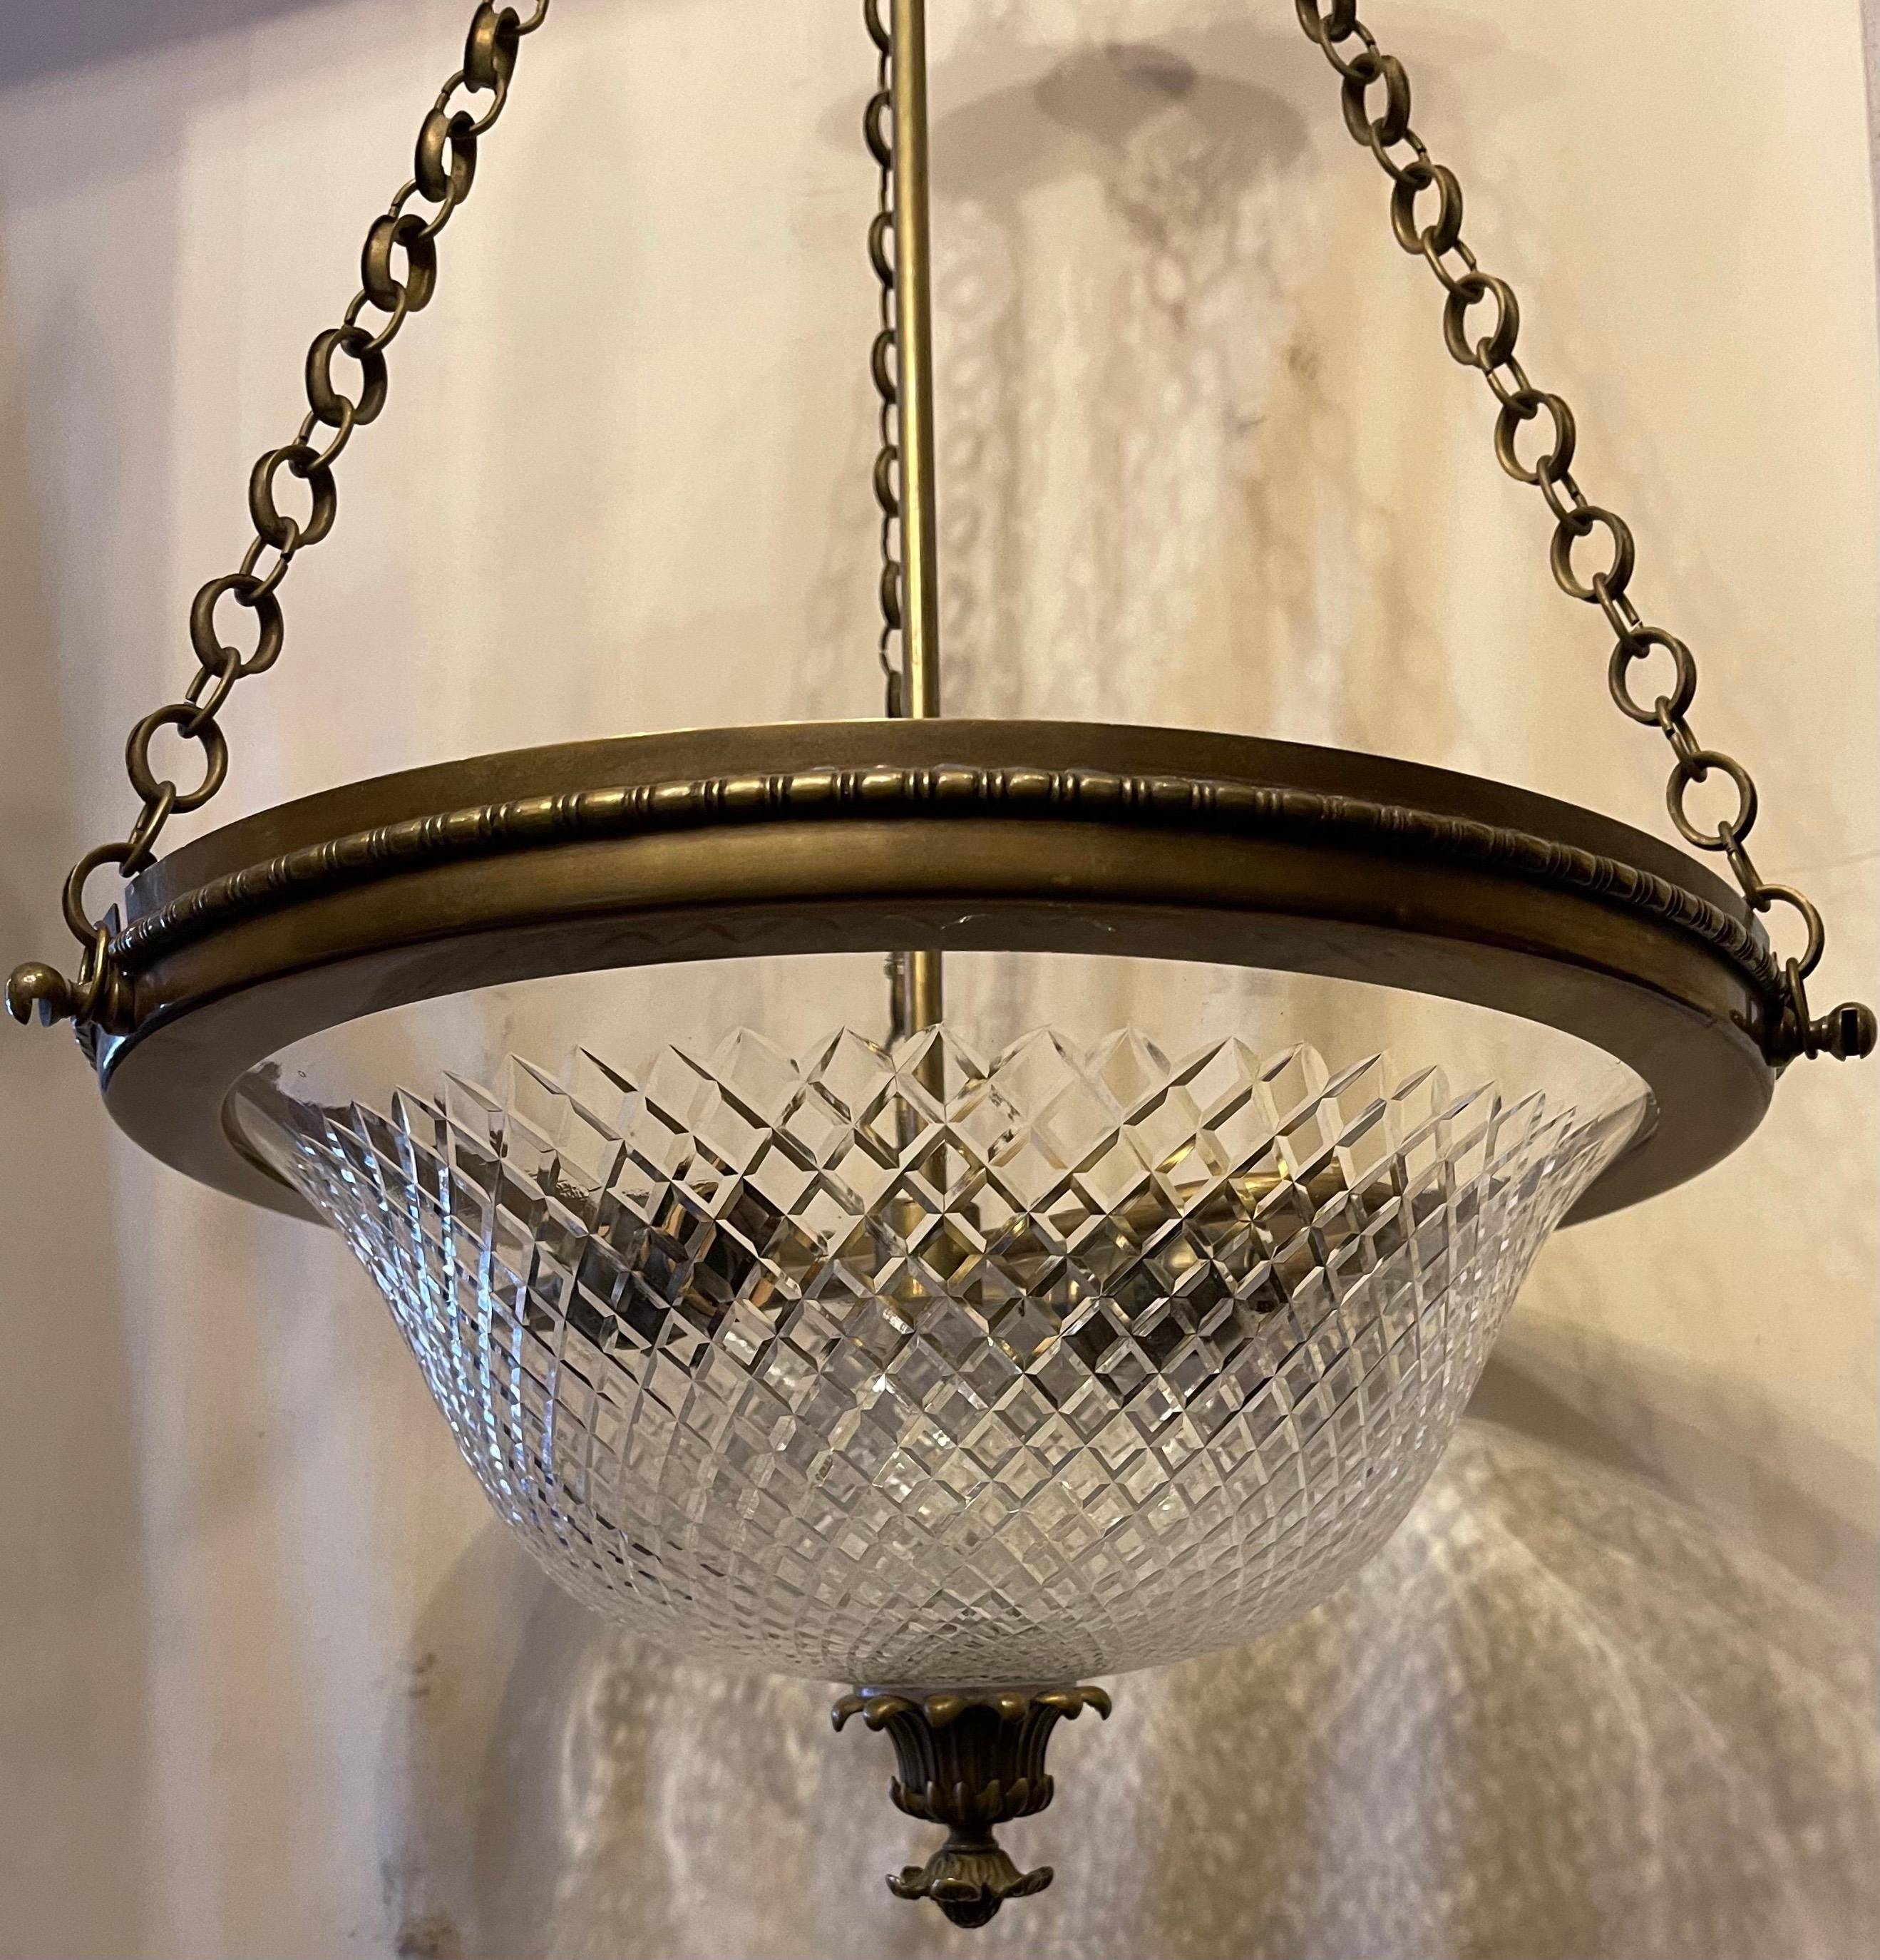 A wonderful pair of Vaughan designs bronze ormolu and cut crystal bowl semi flush mount light fixtures each with 2 Edison sockets, UL listed and ready to install with mounting brackets. Vaughn labels inside each canopy.

These fixtures can be cut